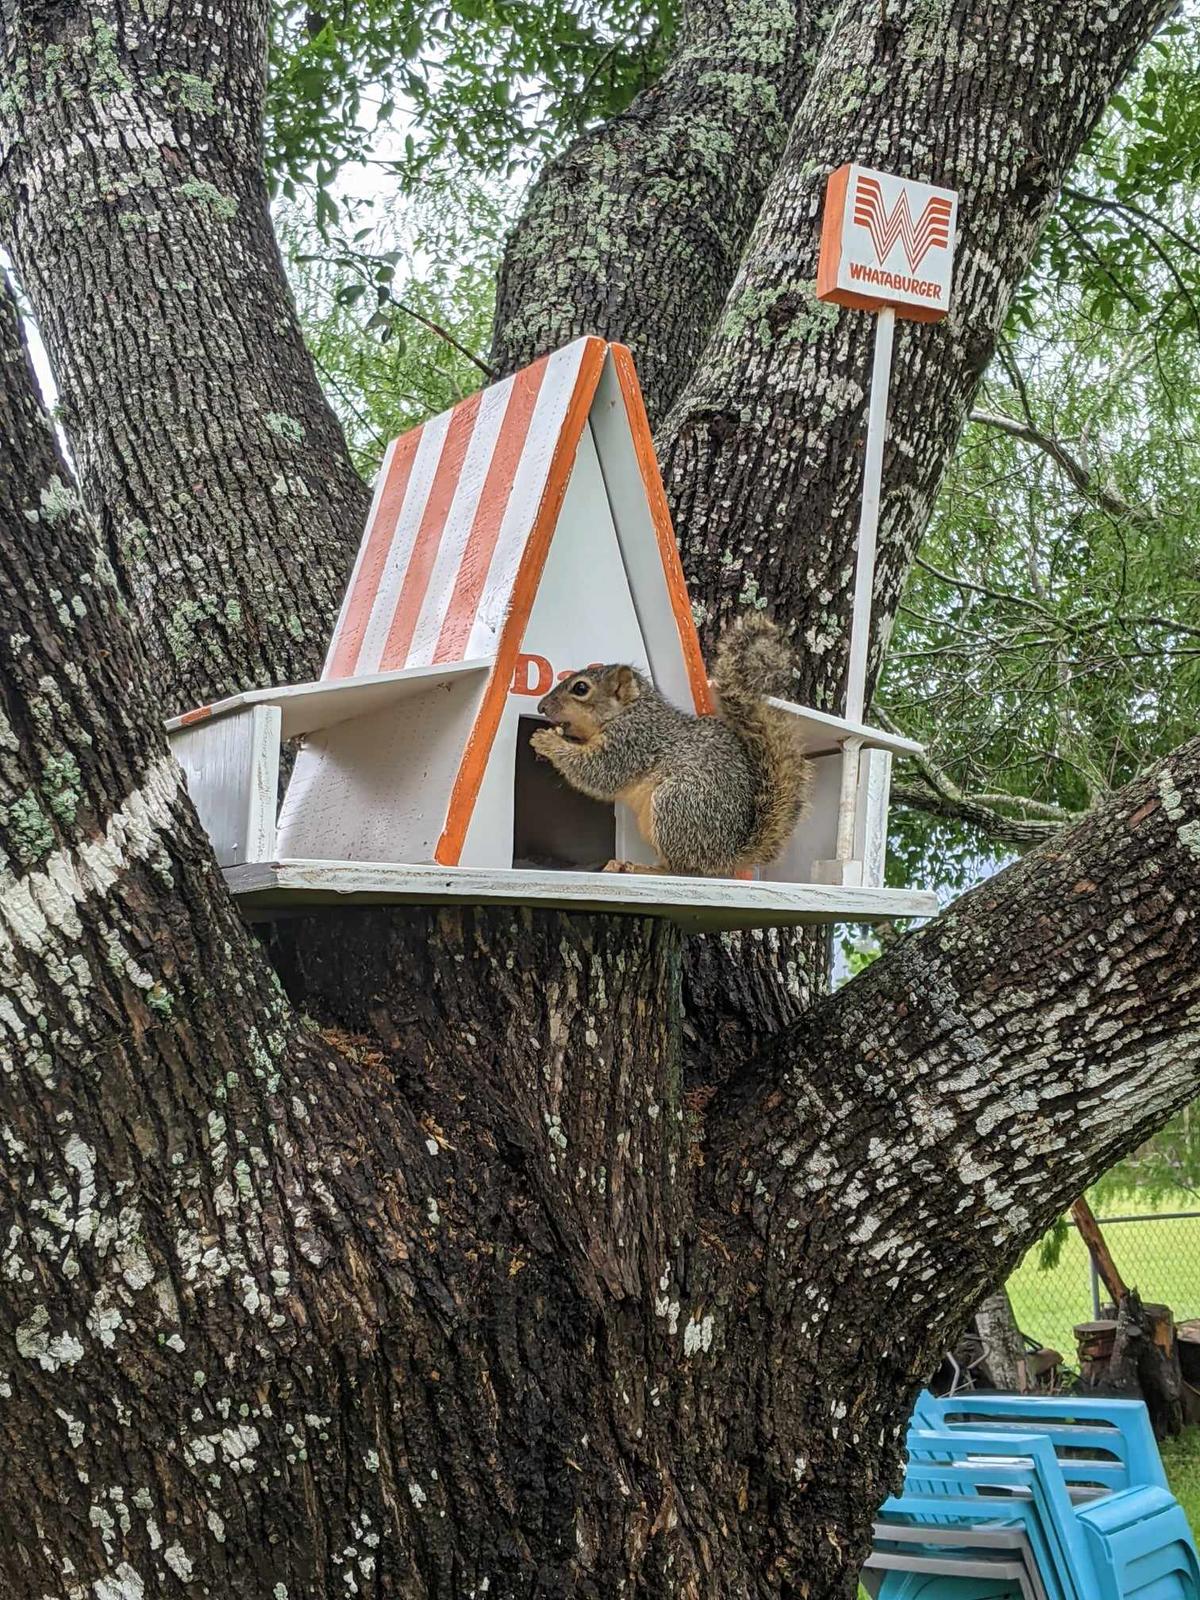 Dale the squirrel's treehouse. (Courtesy of <a href="https://www.facebook.com/keith.morgan.98/">Keith Morgan</a>)